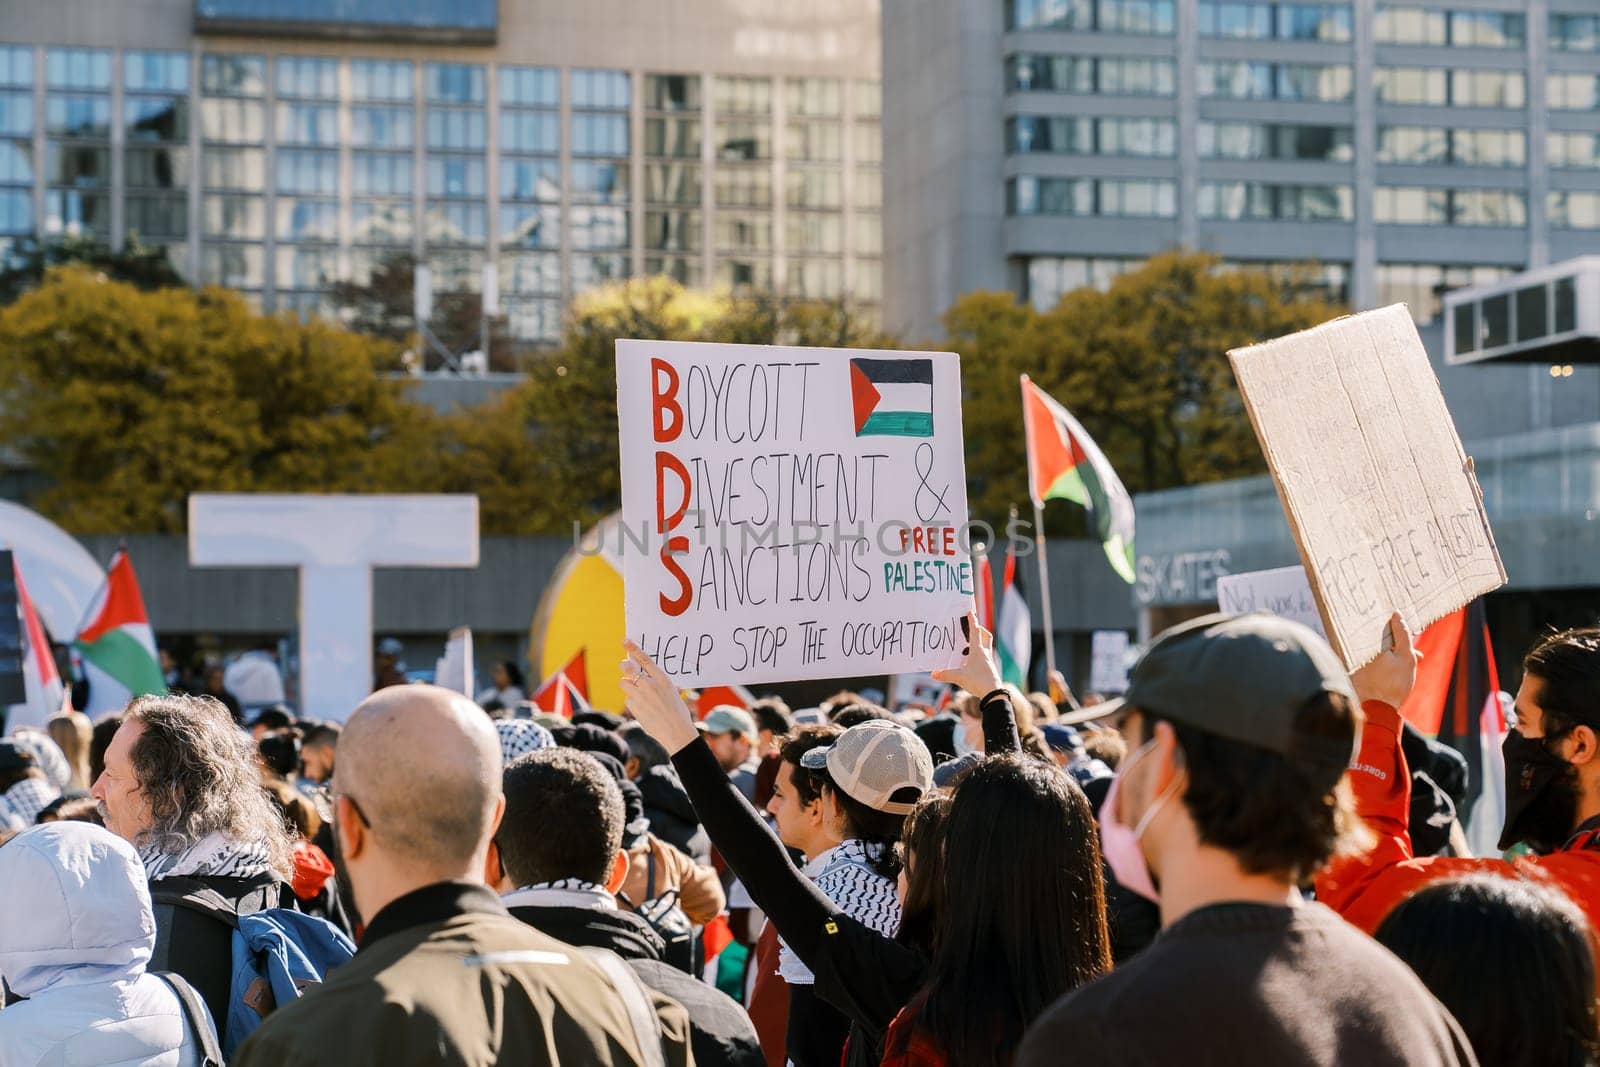 Toronto, Canada - 28 October 2023: Protesters march in the city, holding signs advocating for Boycott, Divestment, and Sanctions against the occupation and supporting Palestine by Nadtochiy